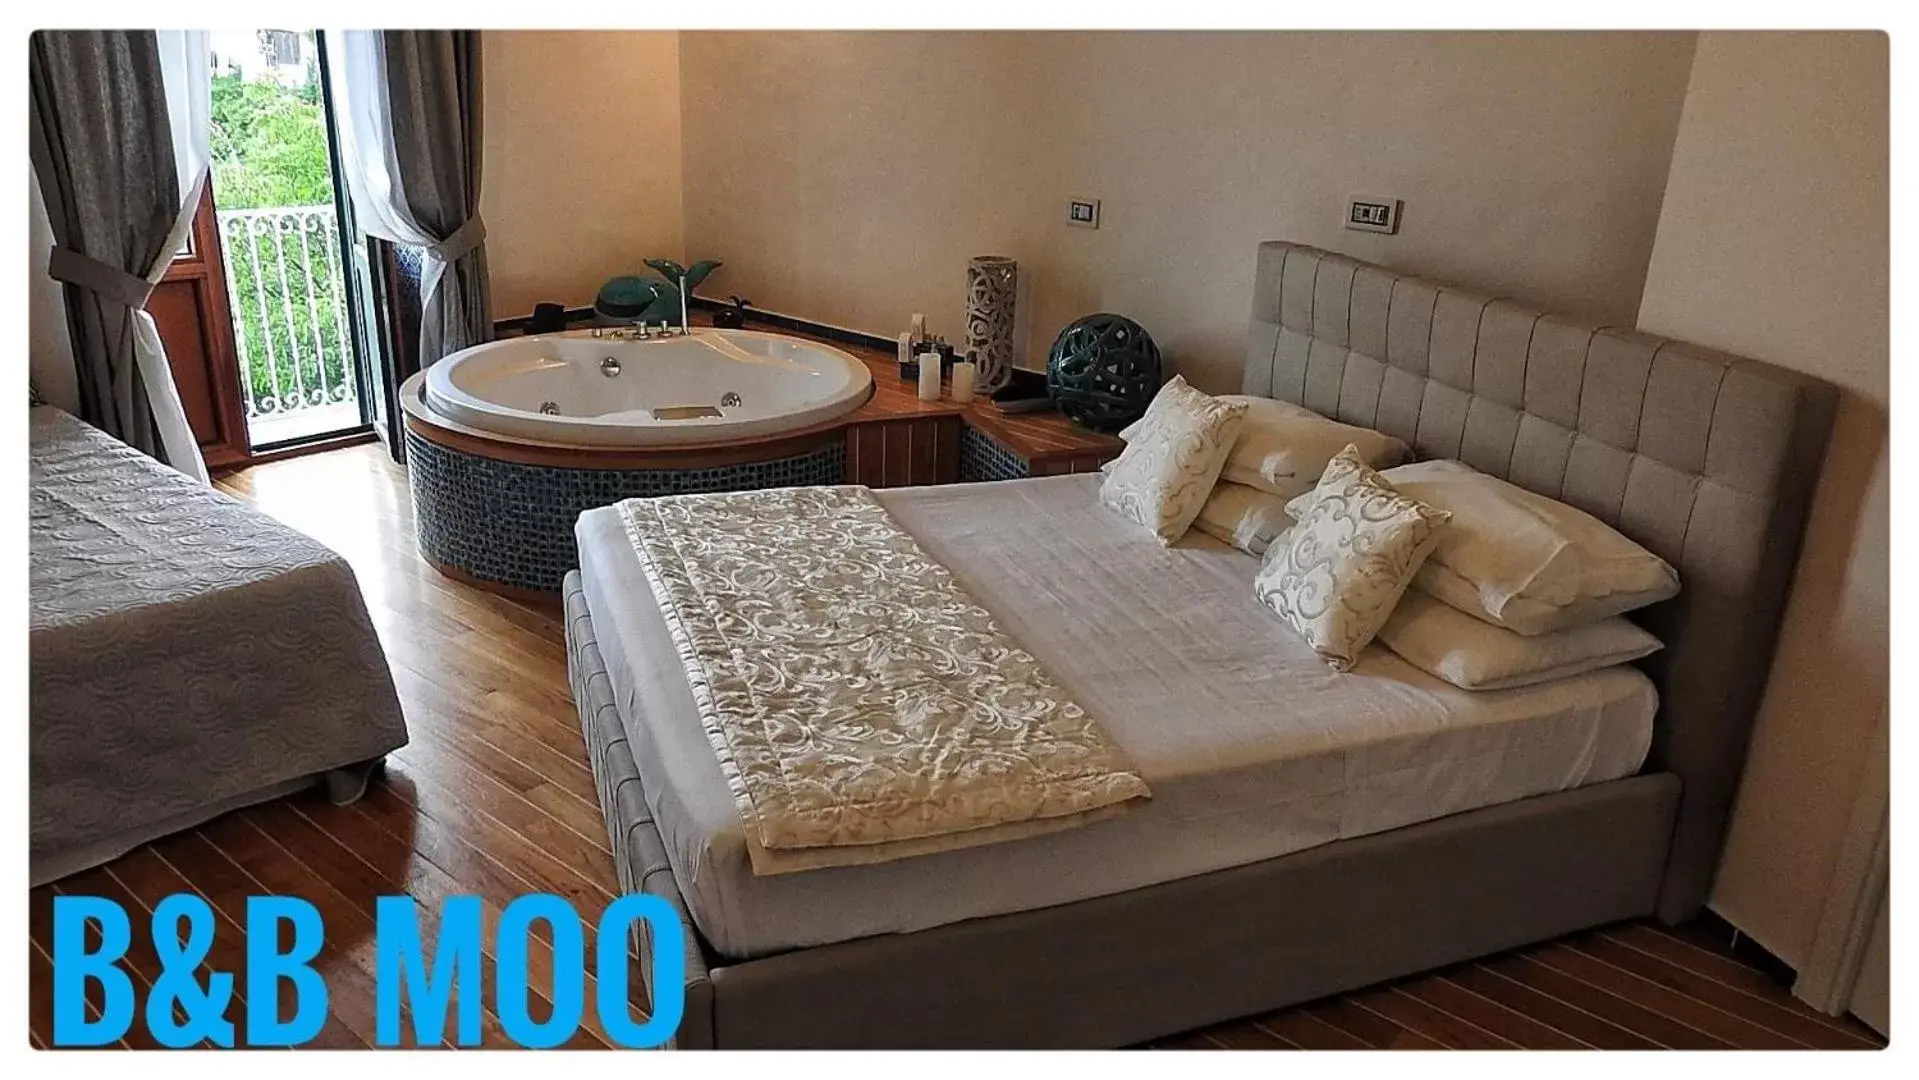 Bed in Moo